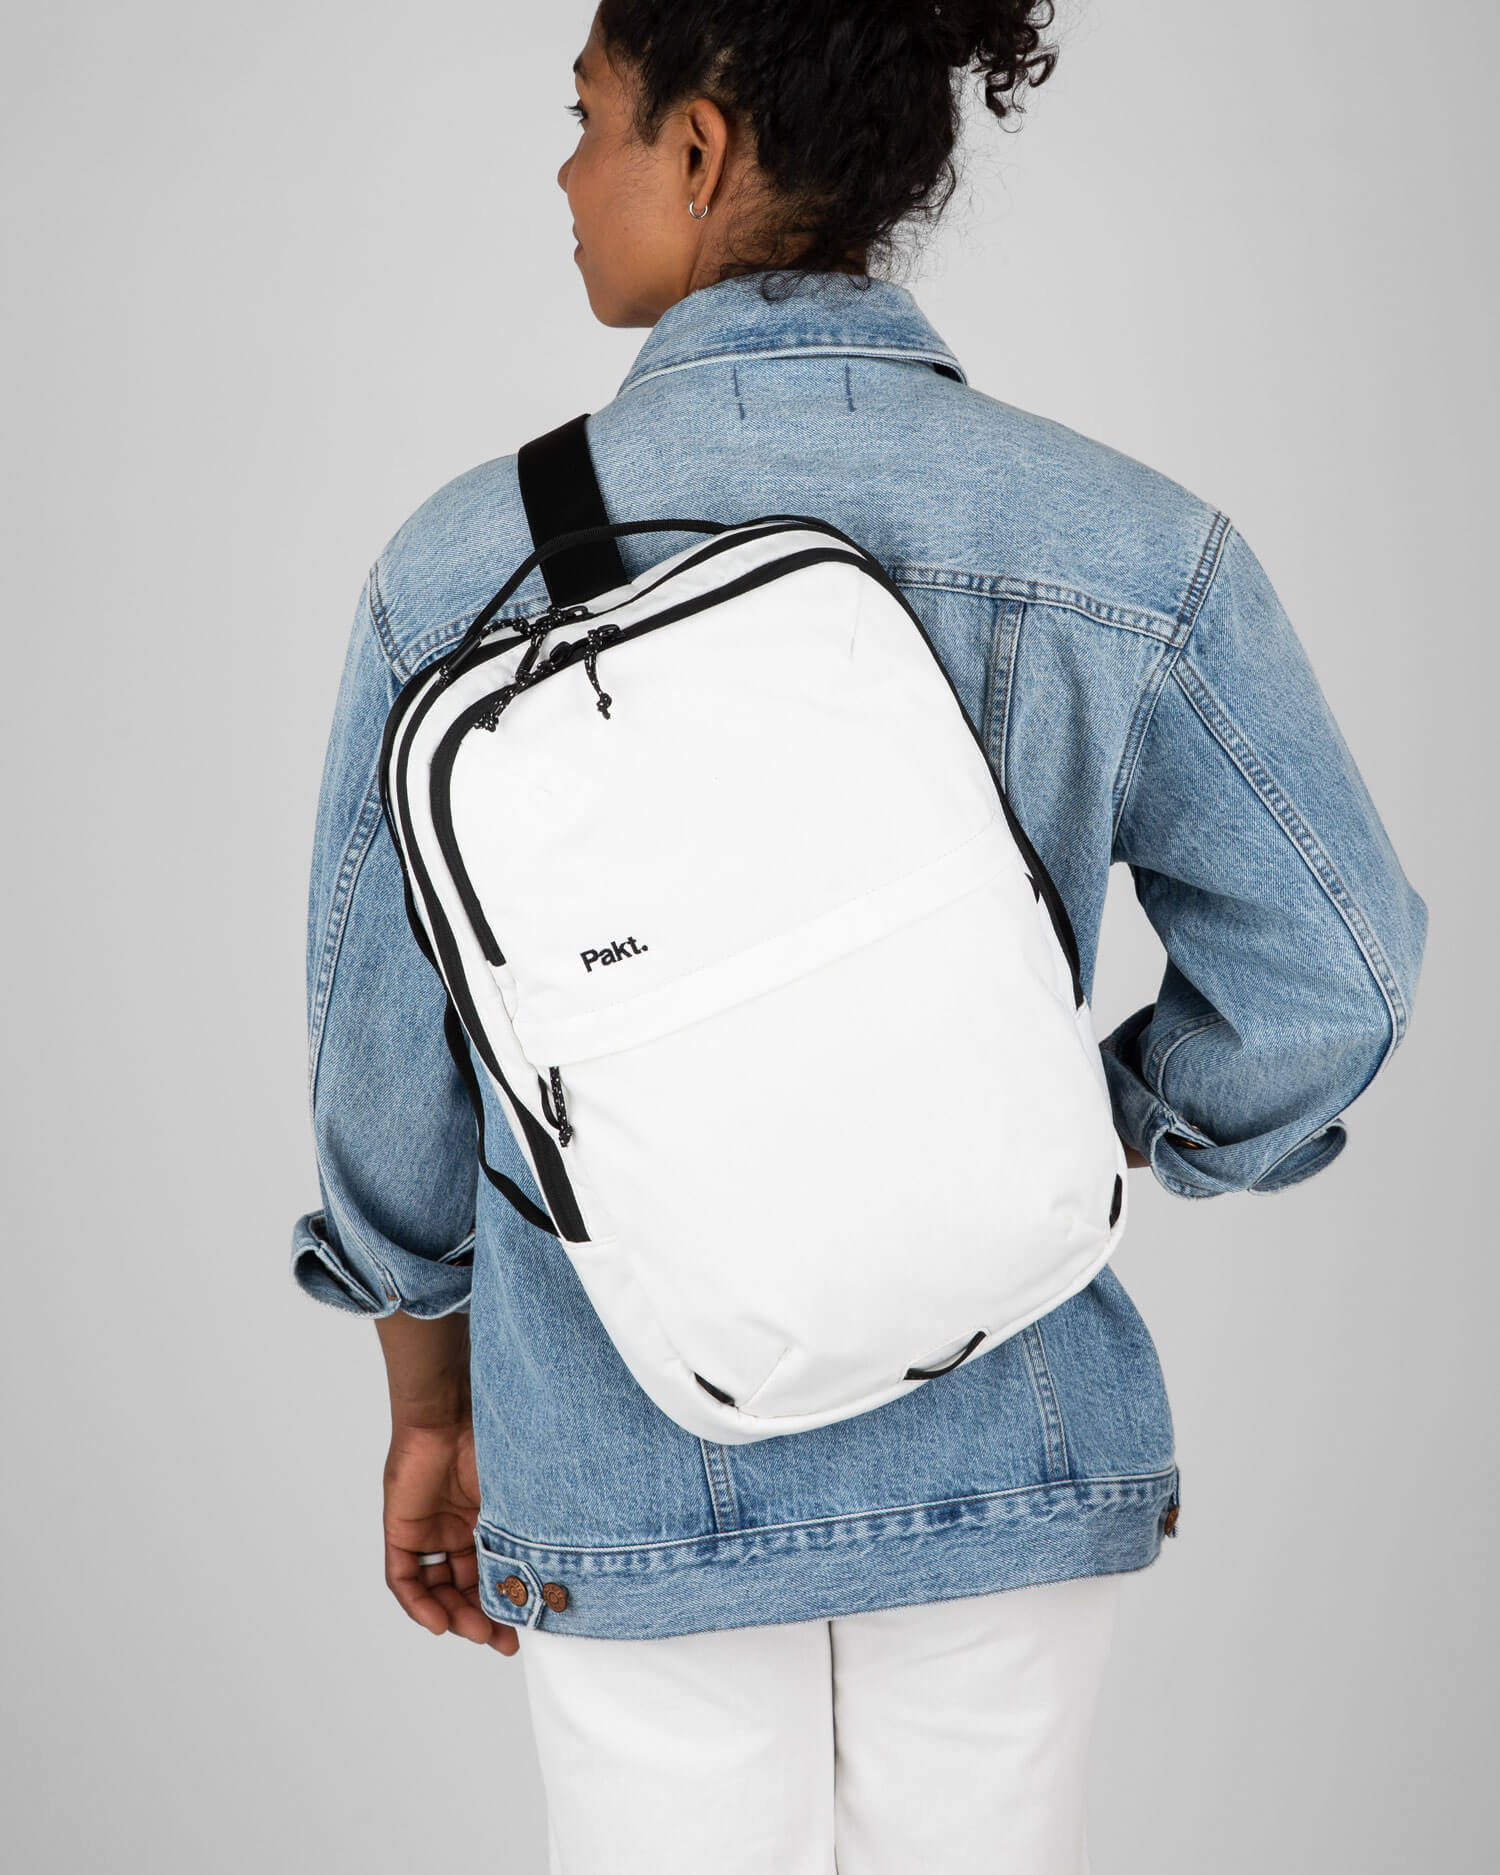 Woman carrying sling bag white